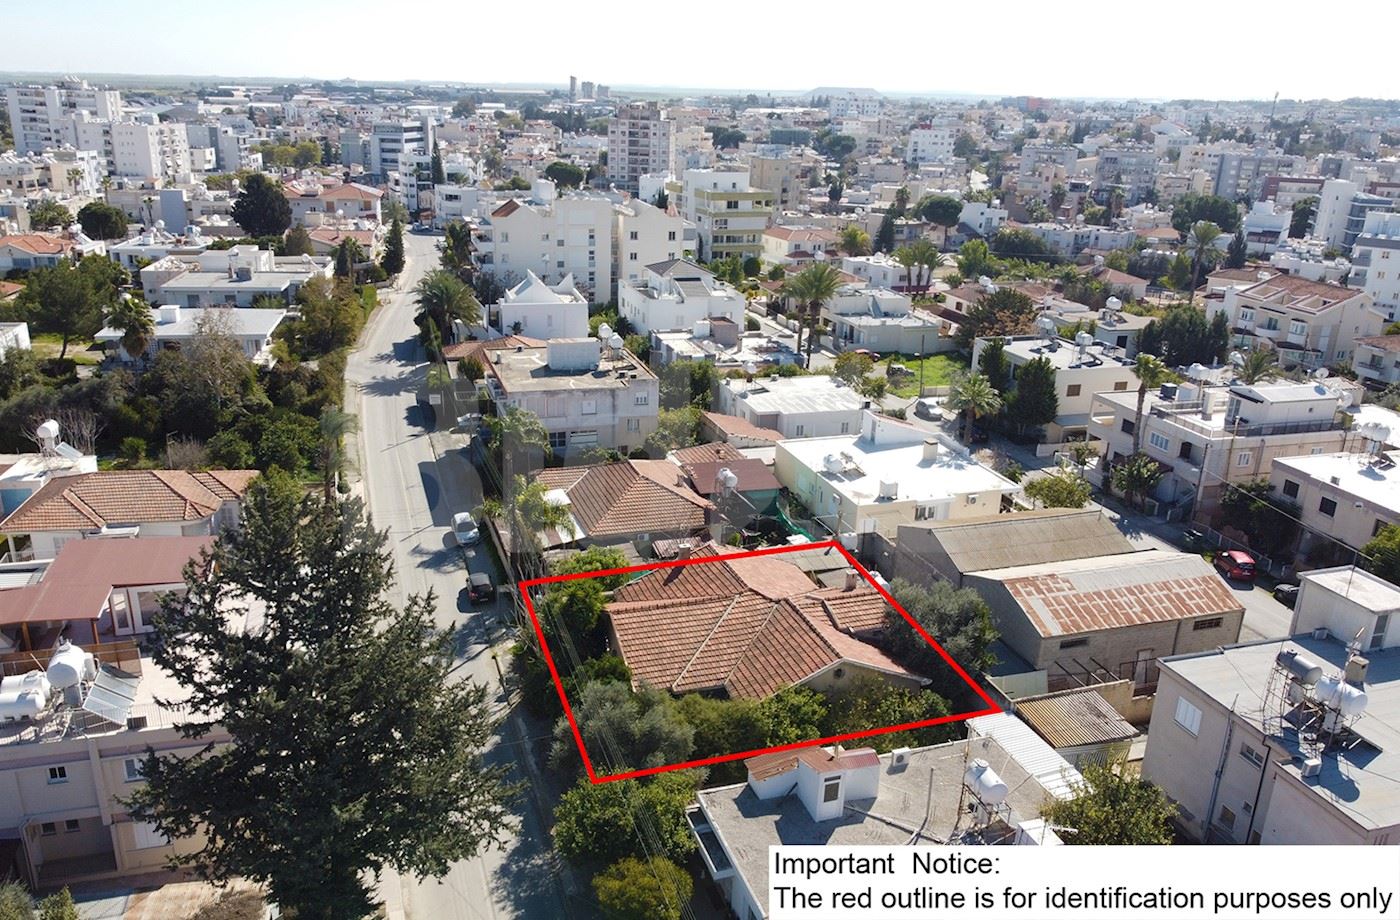 Ground floor house within a residential zoned plot, Nicosia 1/23